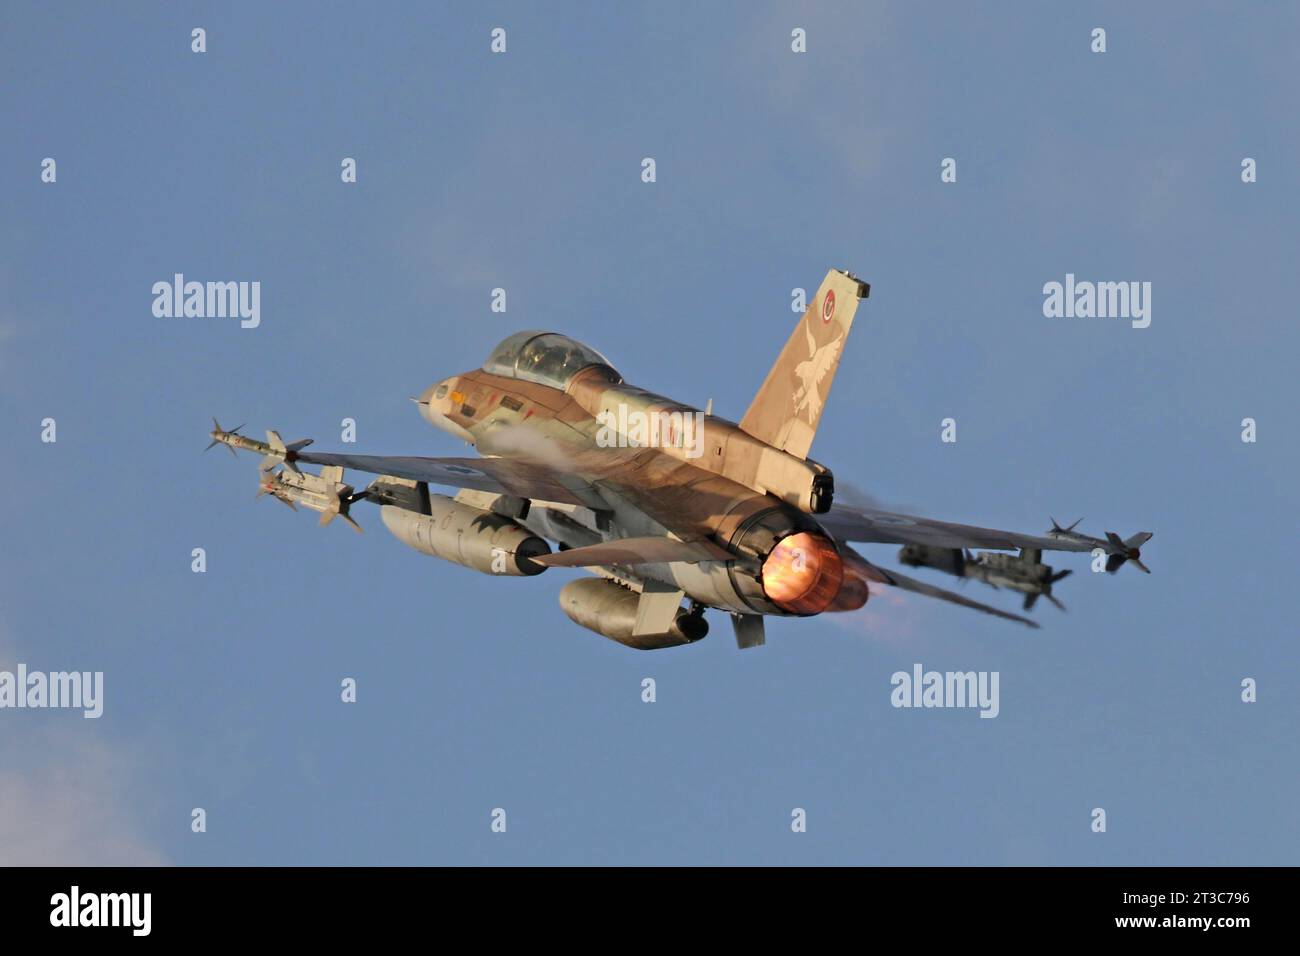 An Israeli Air Force F-16D Barak taking off, armed with missiles. Stock Photo